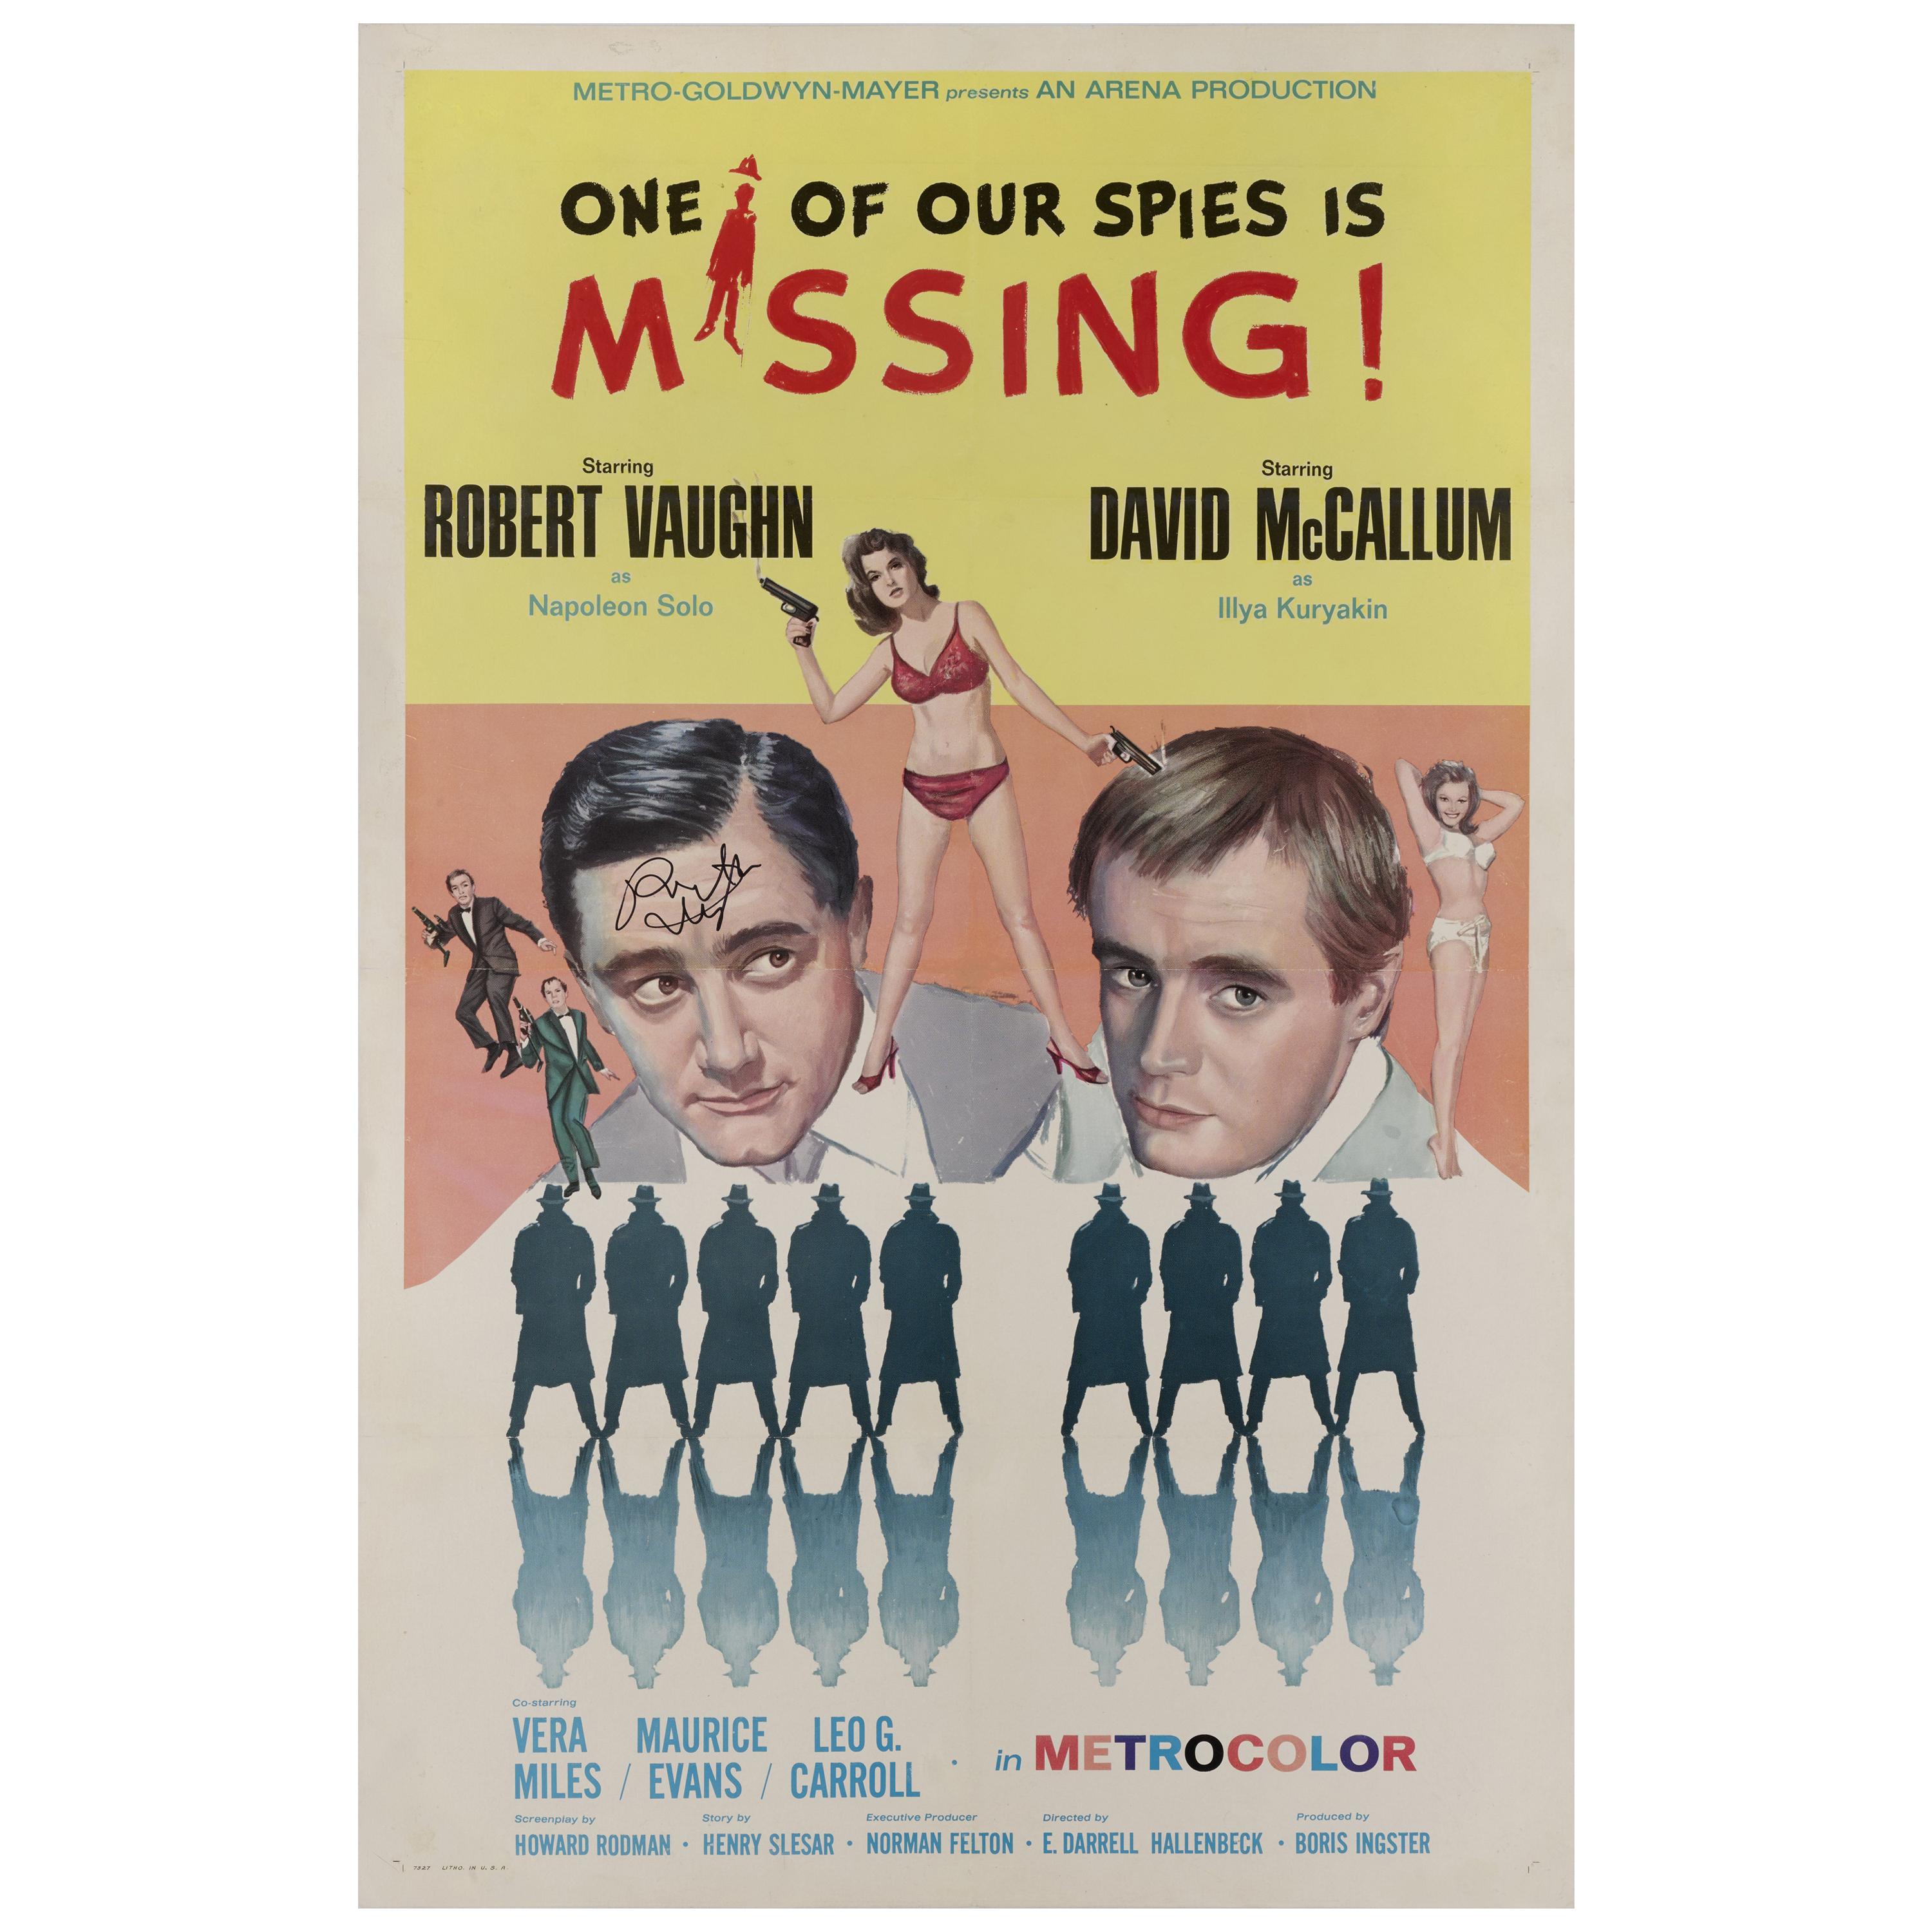 One of Our Spies is Missing